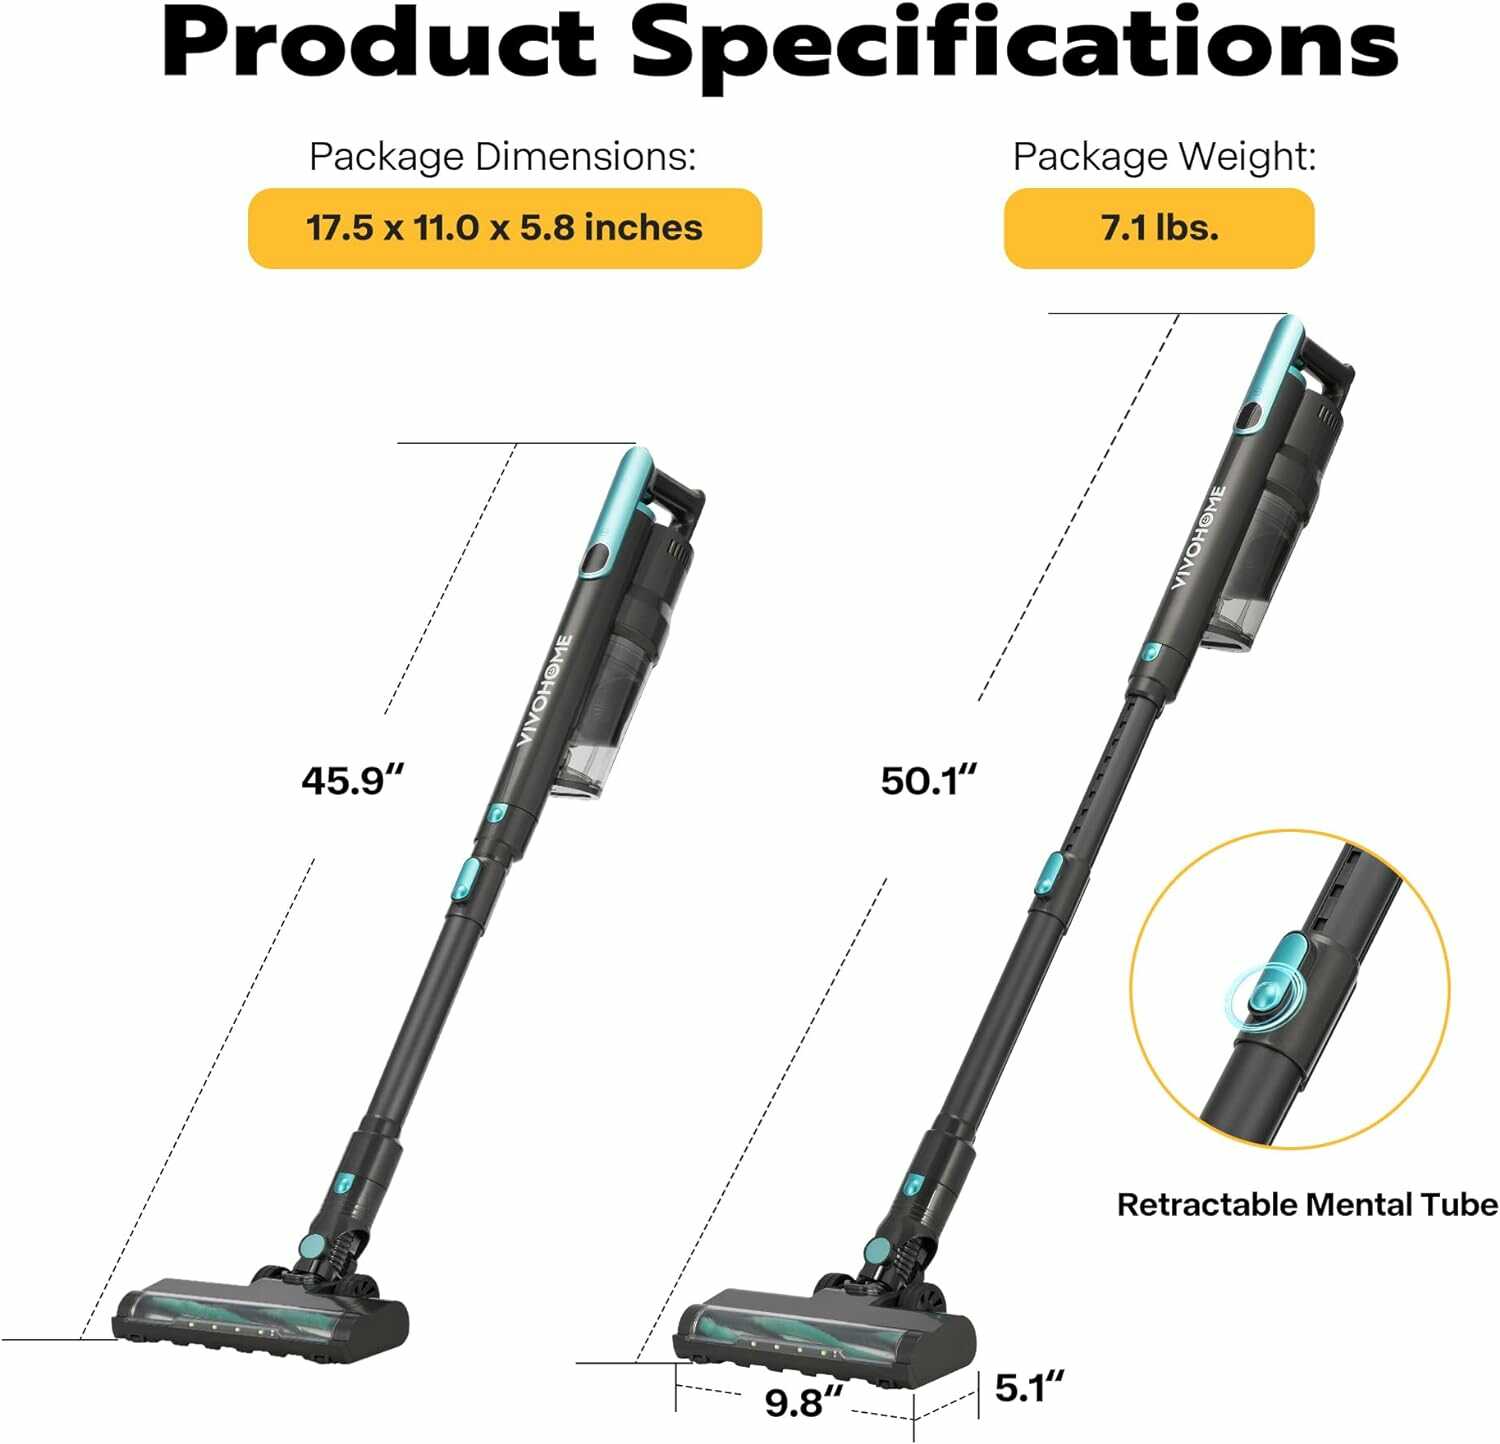 VIVOHOME Handheld Cordless Vacuum Cleaner with 3 Suction Modes